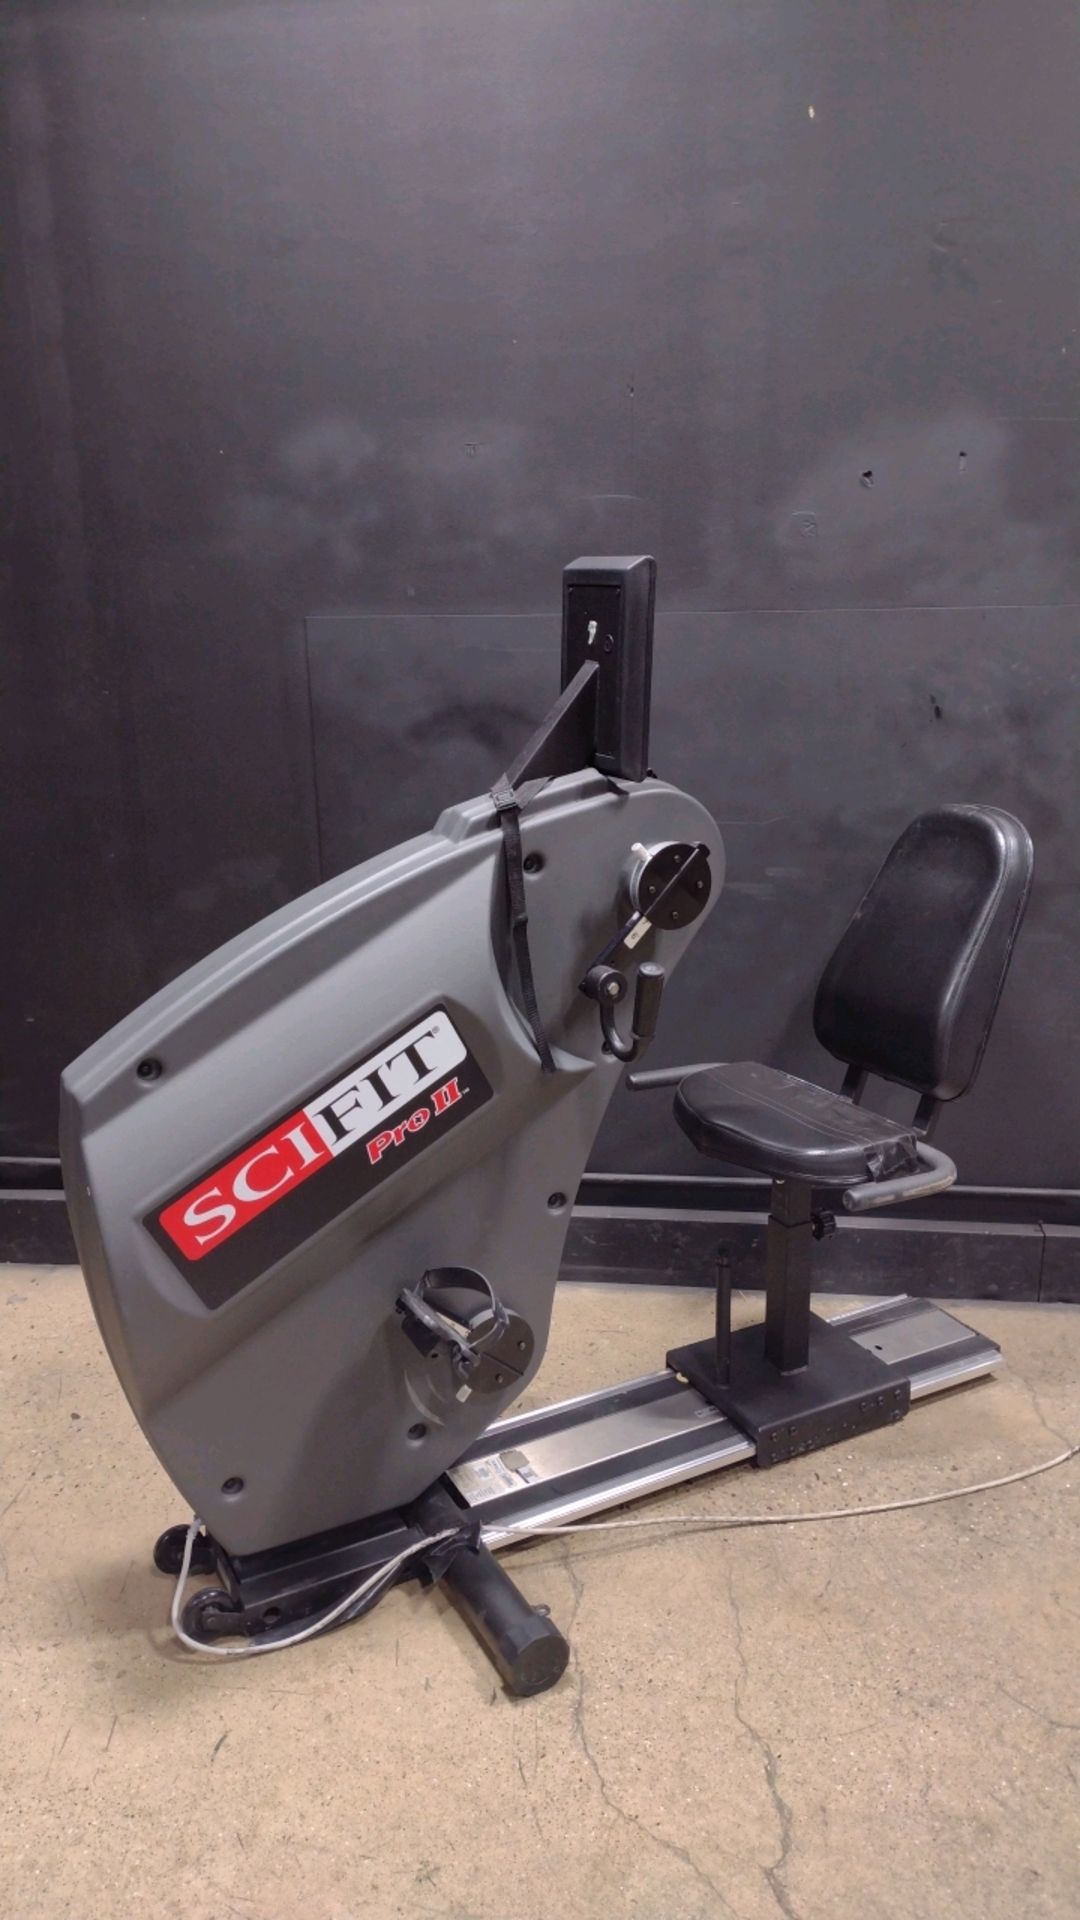 SCIFIT PRO II ERGOMETER (LOCATED AT 3325 MOUNT PROSPECT ROAD, FRANKLIN PARK, IL, 60131) - Image 2 of 4